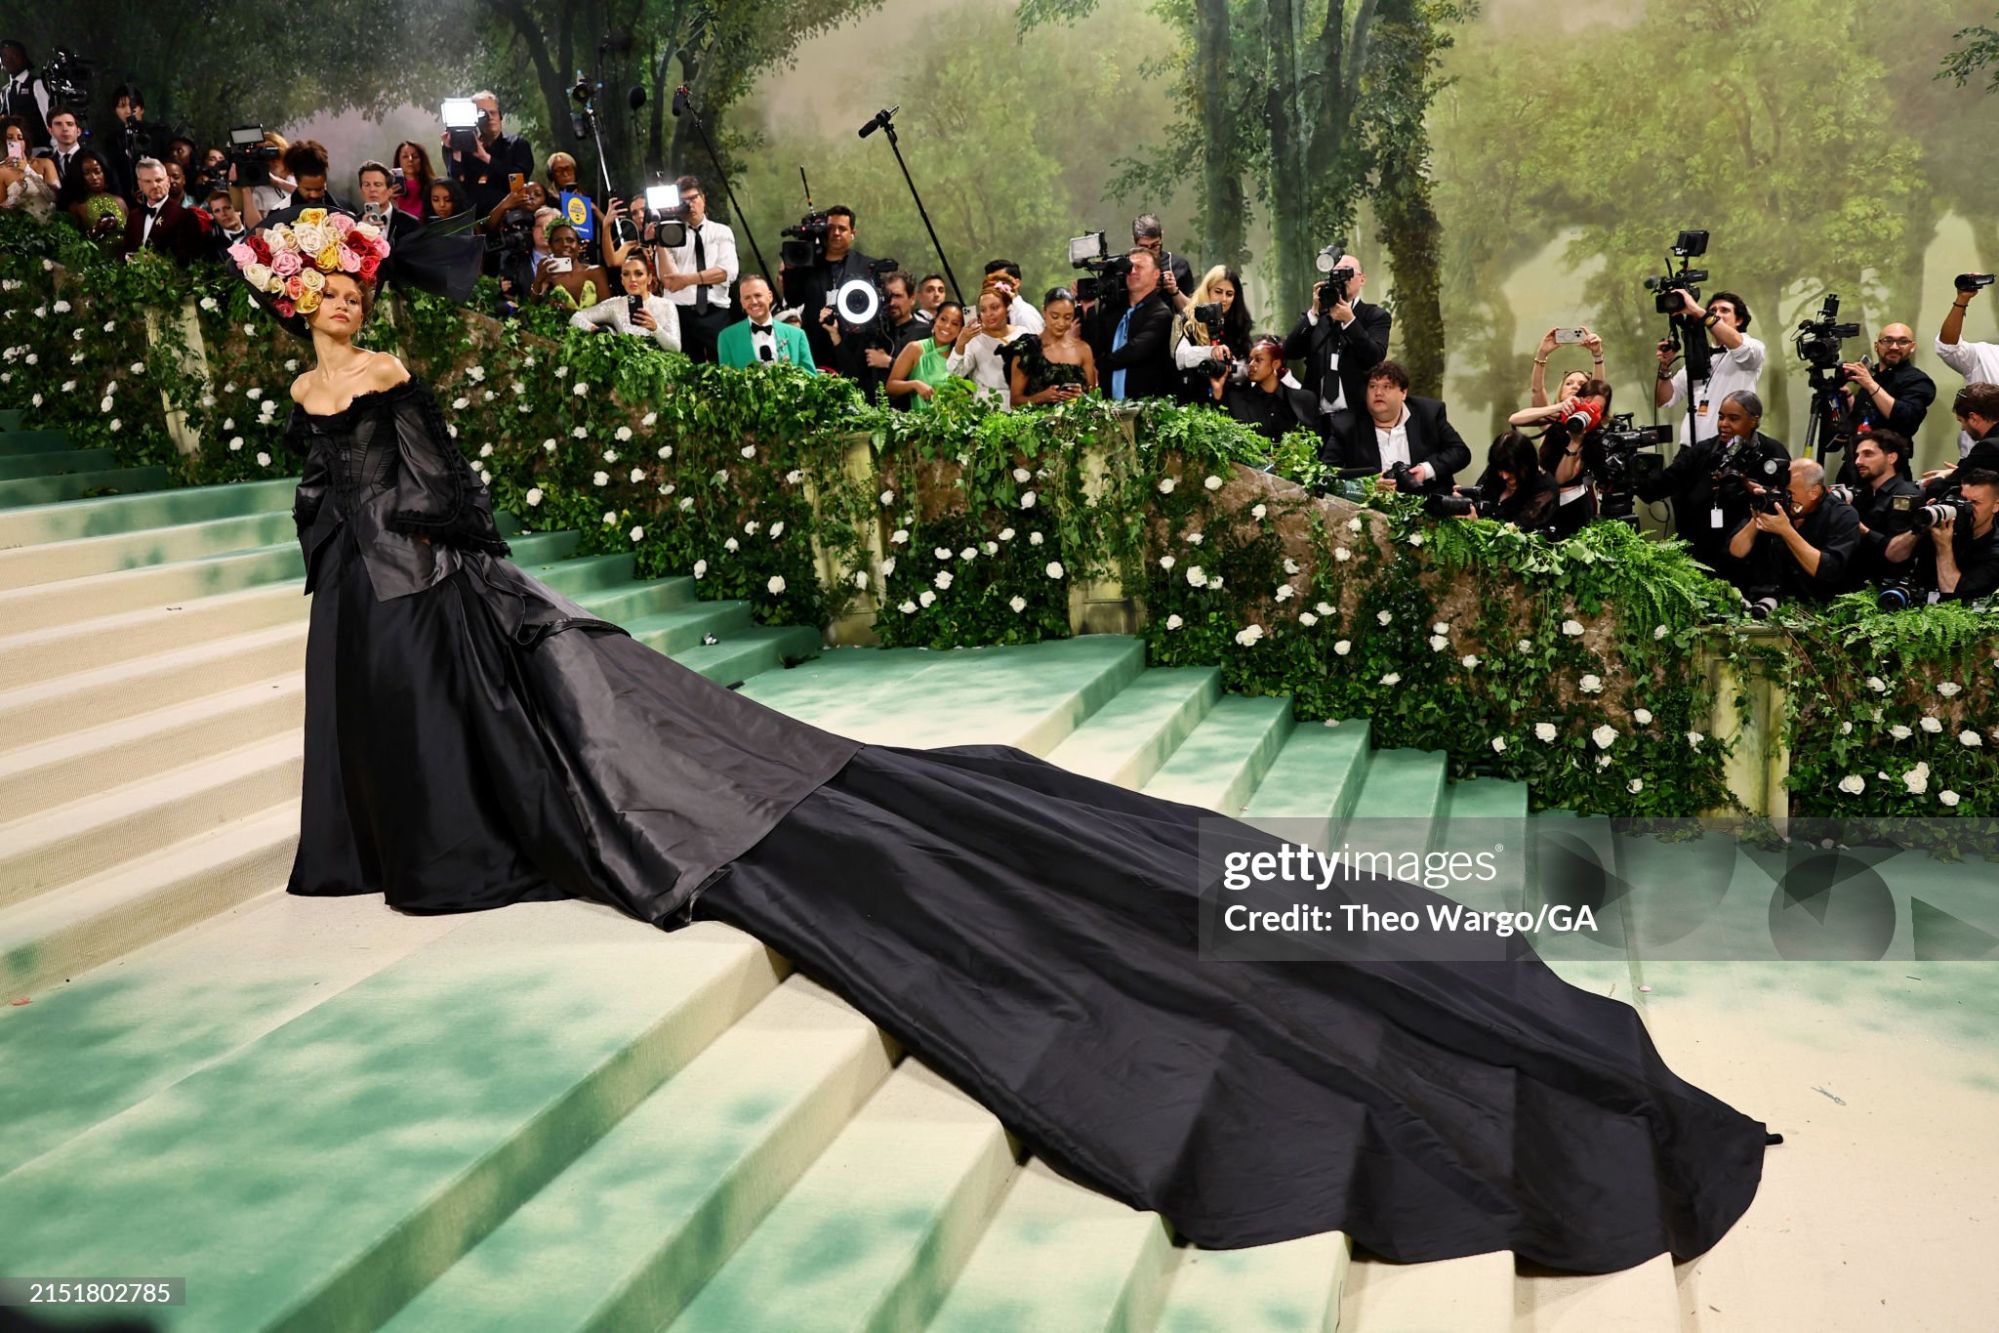 gettyimages-2151802785-2048x2048.jpg